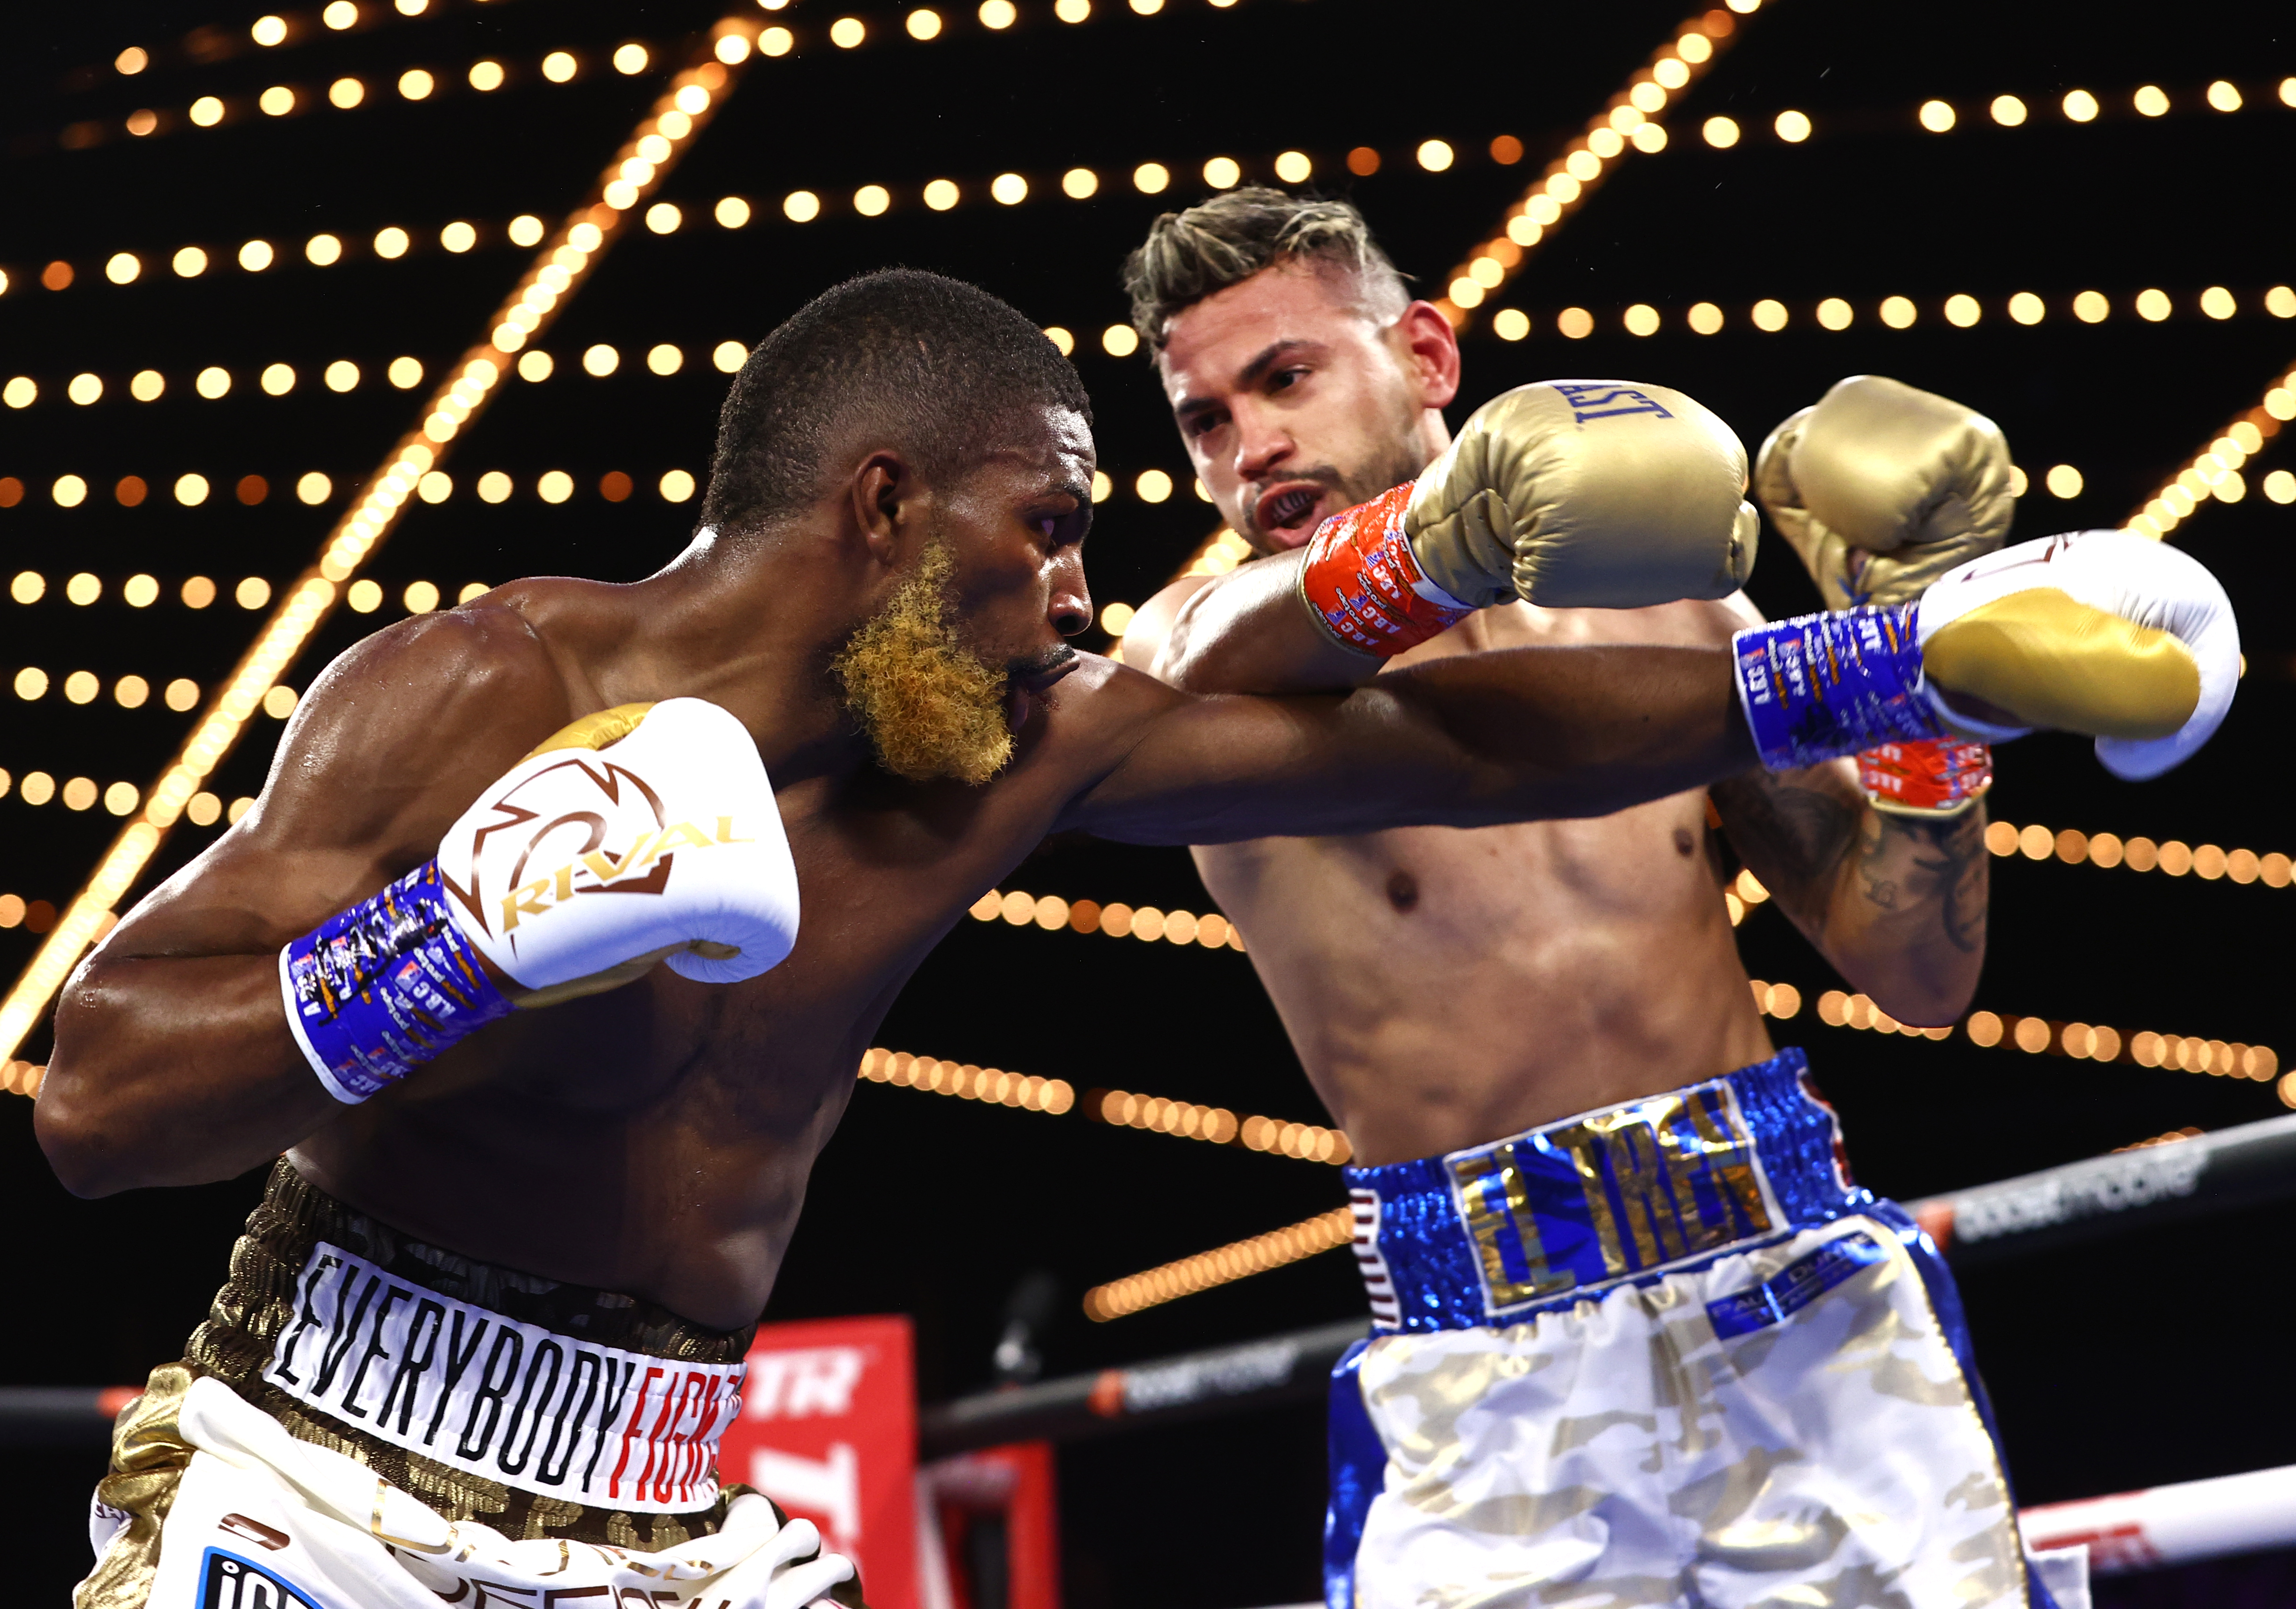 Robeisy Ramirez looked excellent in a knockout win over Abraham Nova